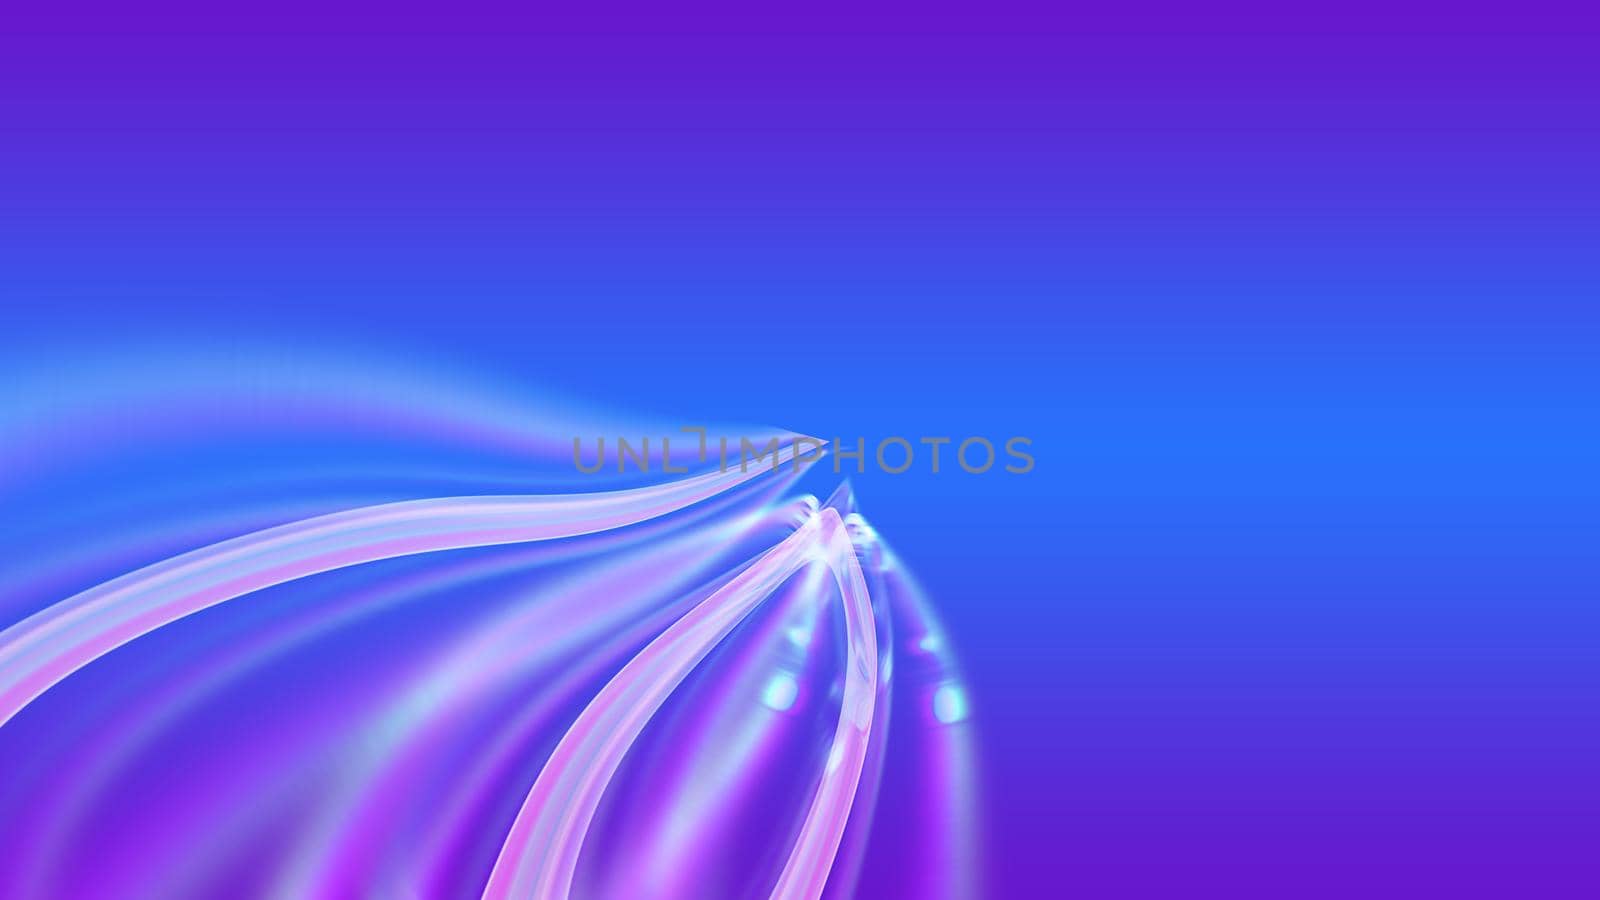 Abstract gradient background with a glowing figure by Vvicca